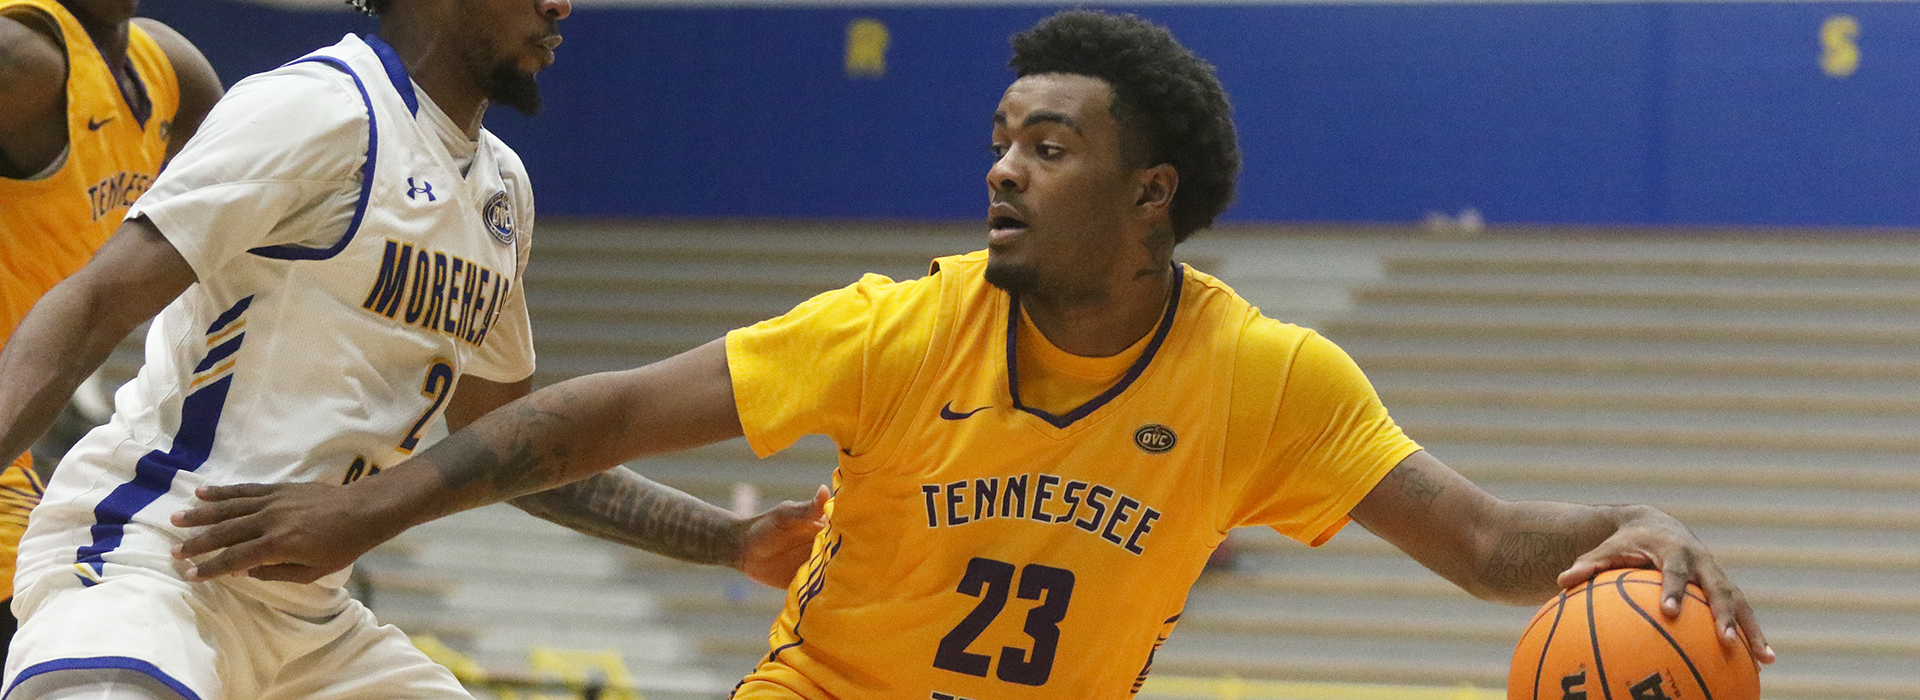 Morehead State downs Golden Eagles with strong showing on glass